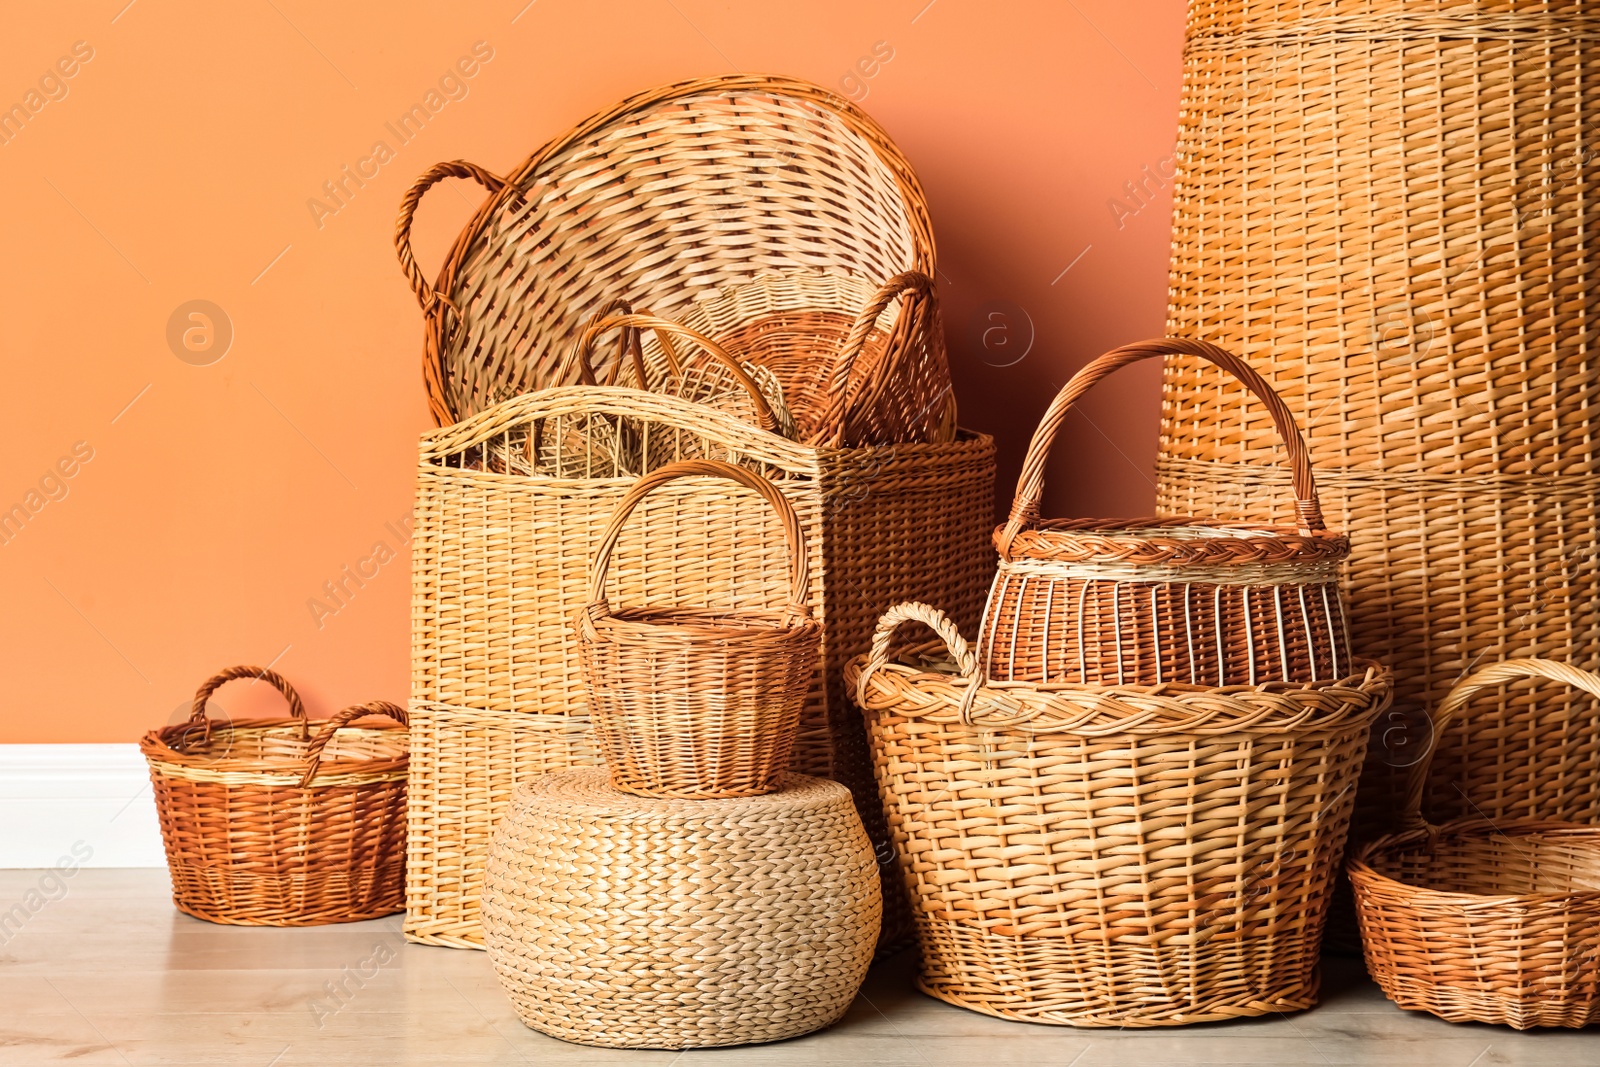 Photo of Many different wicker baskets on floor near coral wall